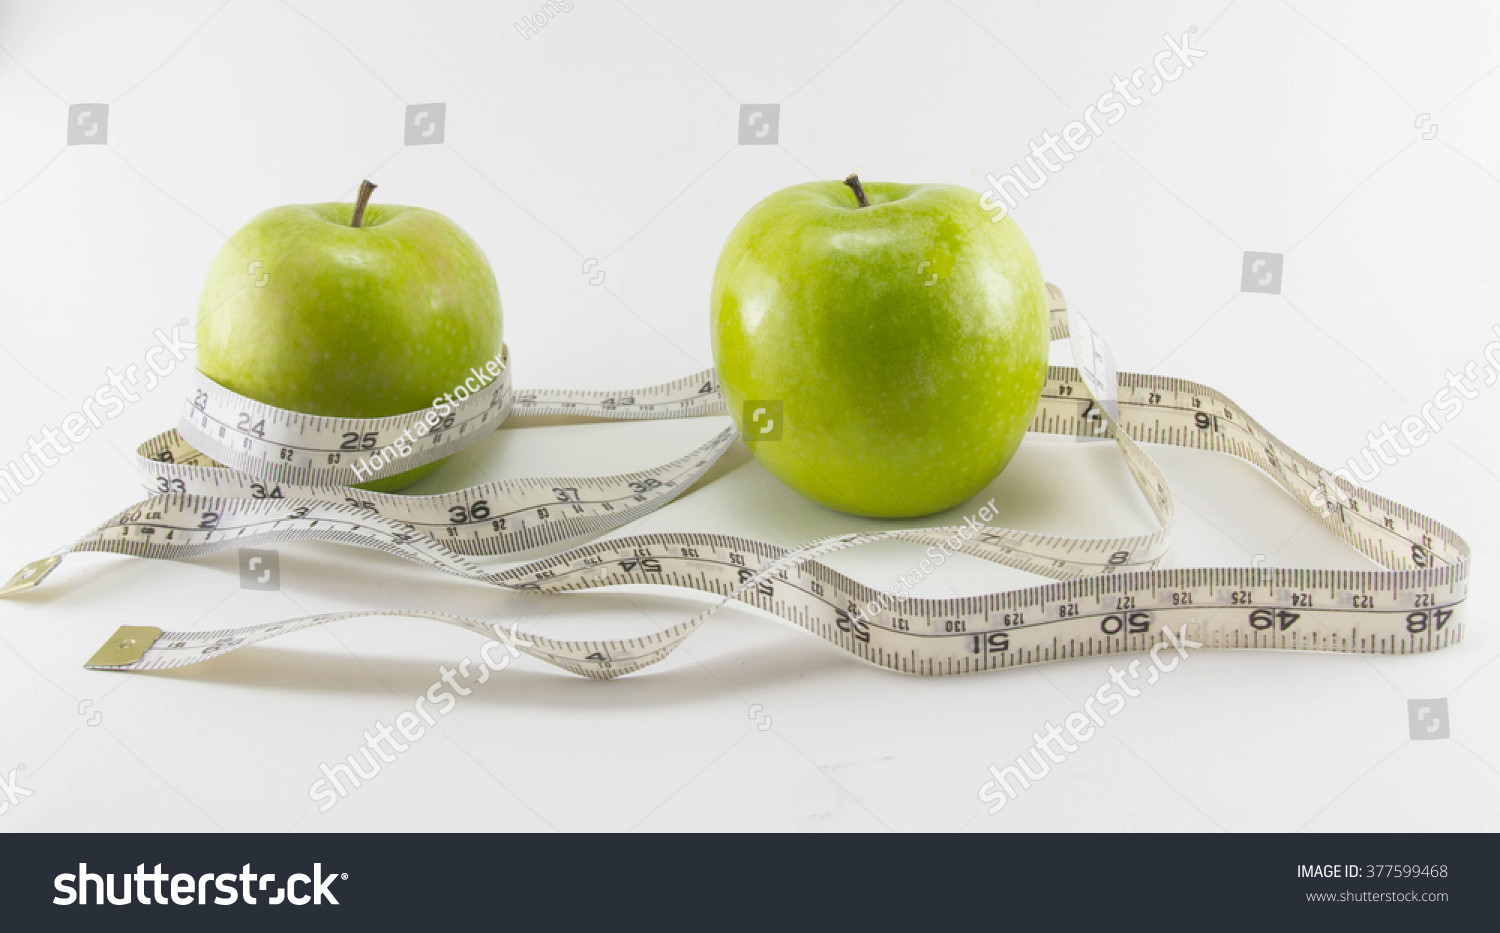 Green apple with Measuring tape on white background in concept of healthy and diet #377599468